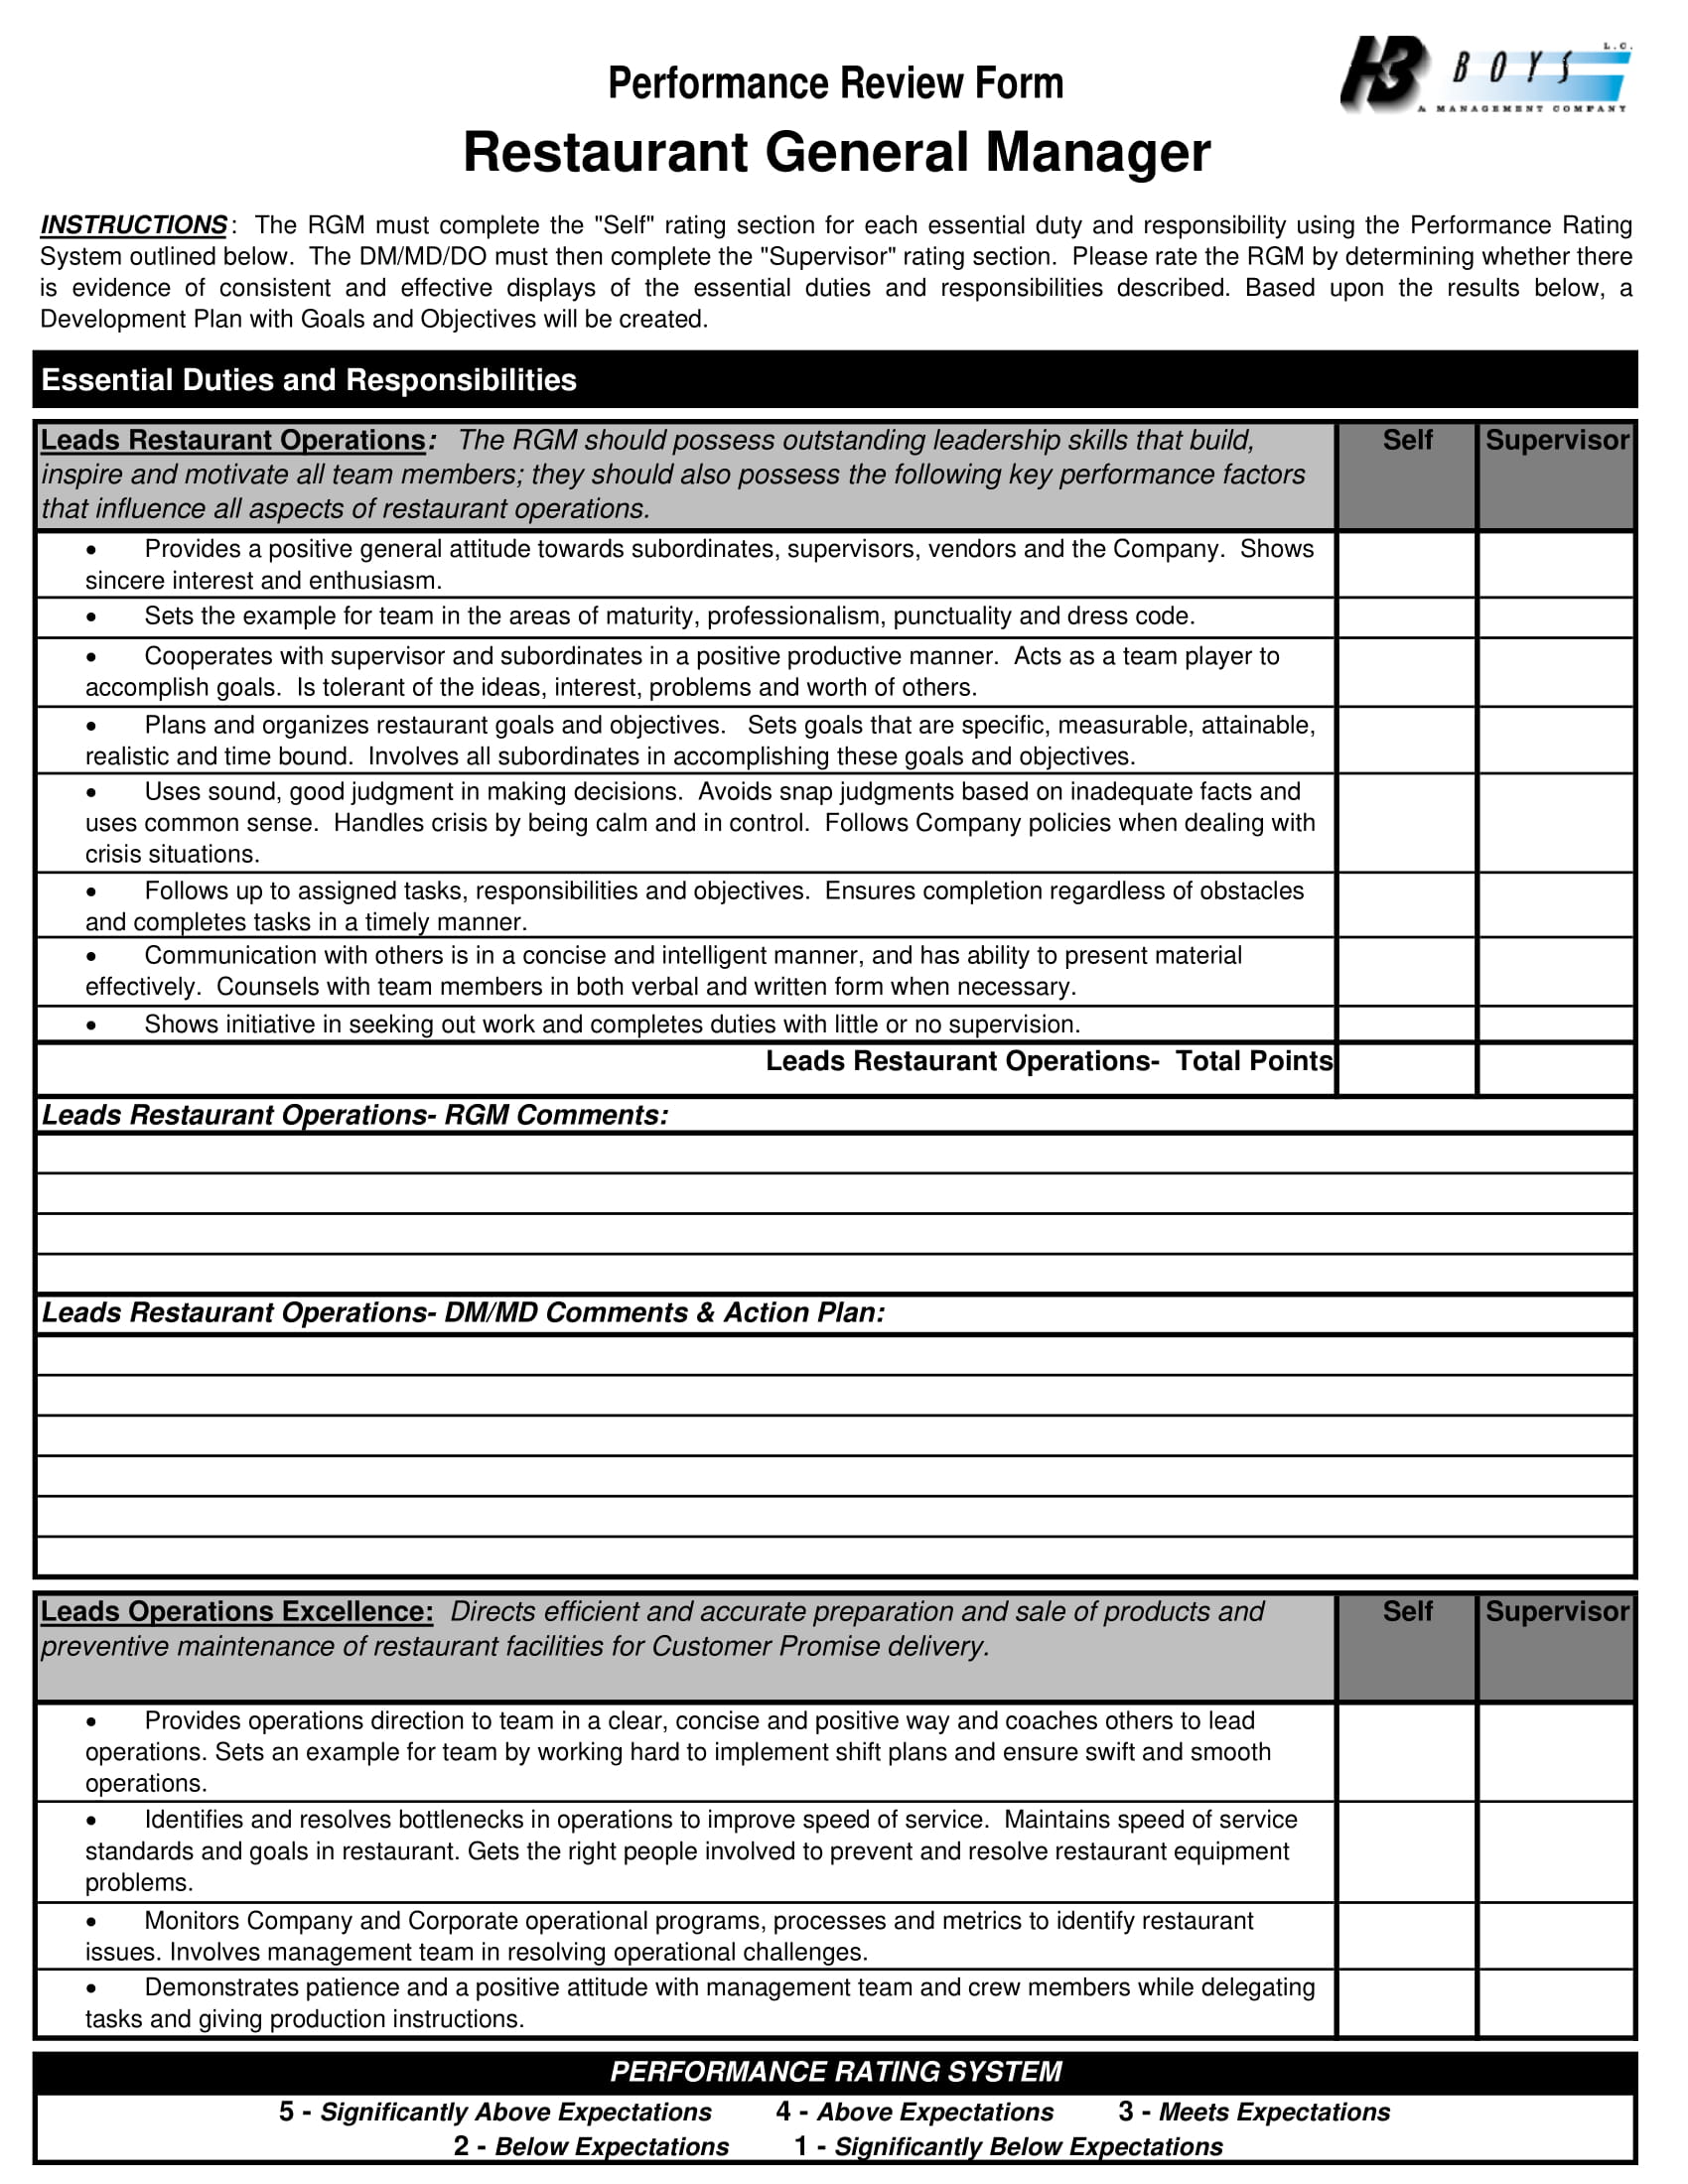 restaurant general manager performance review form 1